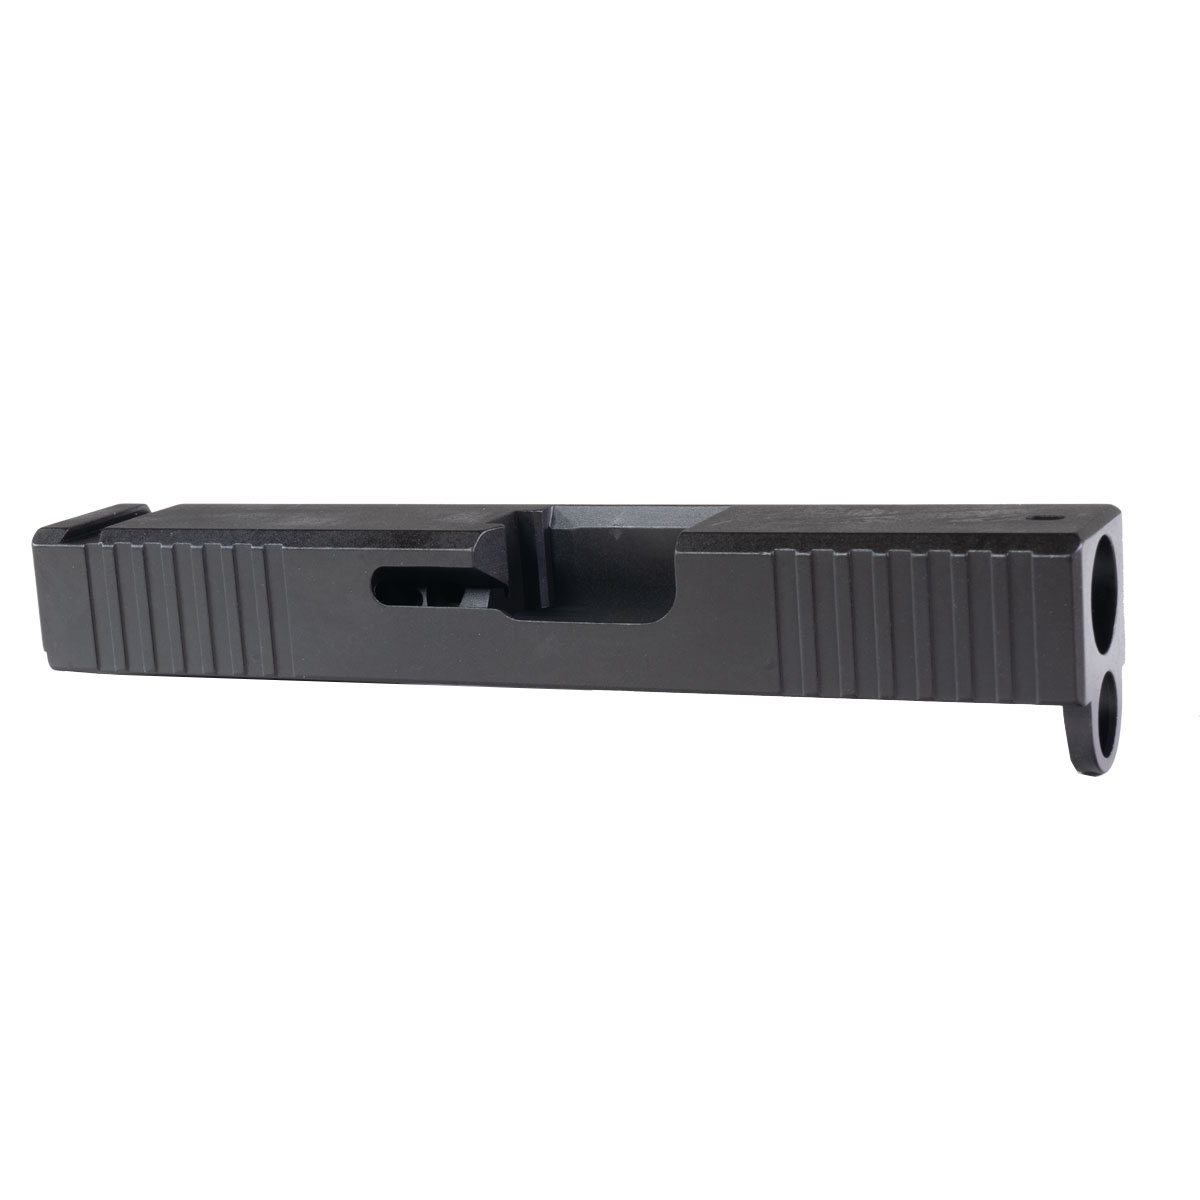 Omega Tactical Distribution 26 - Subcompact Slide - Gen3 G26 416 Heat Treated Stainless Steel Nitride Finish